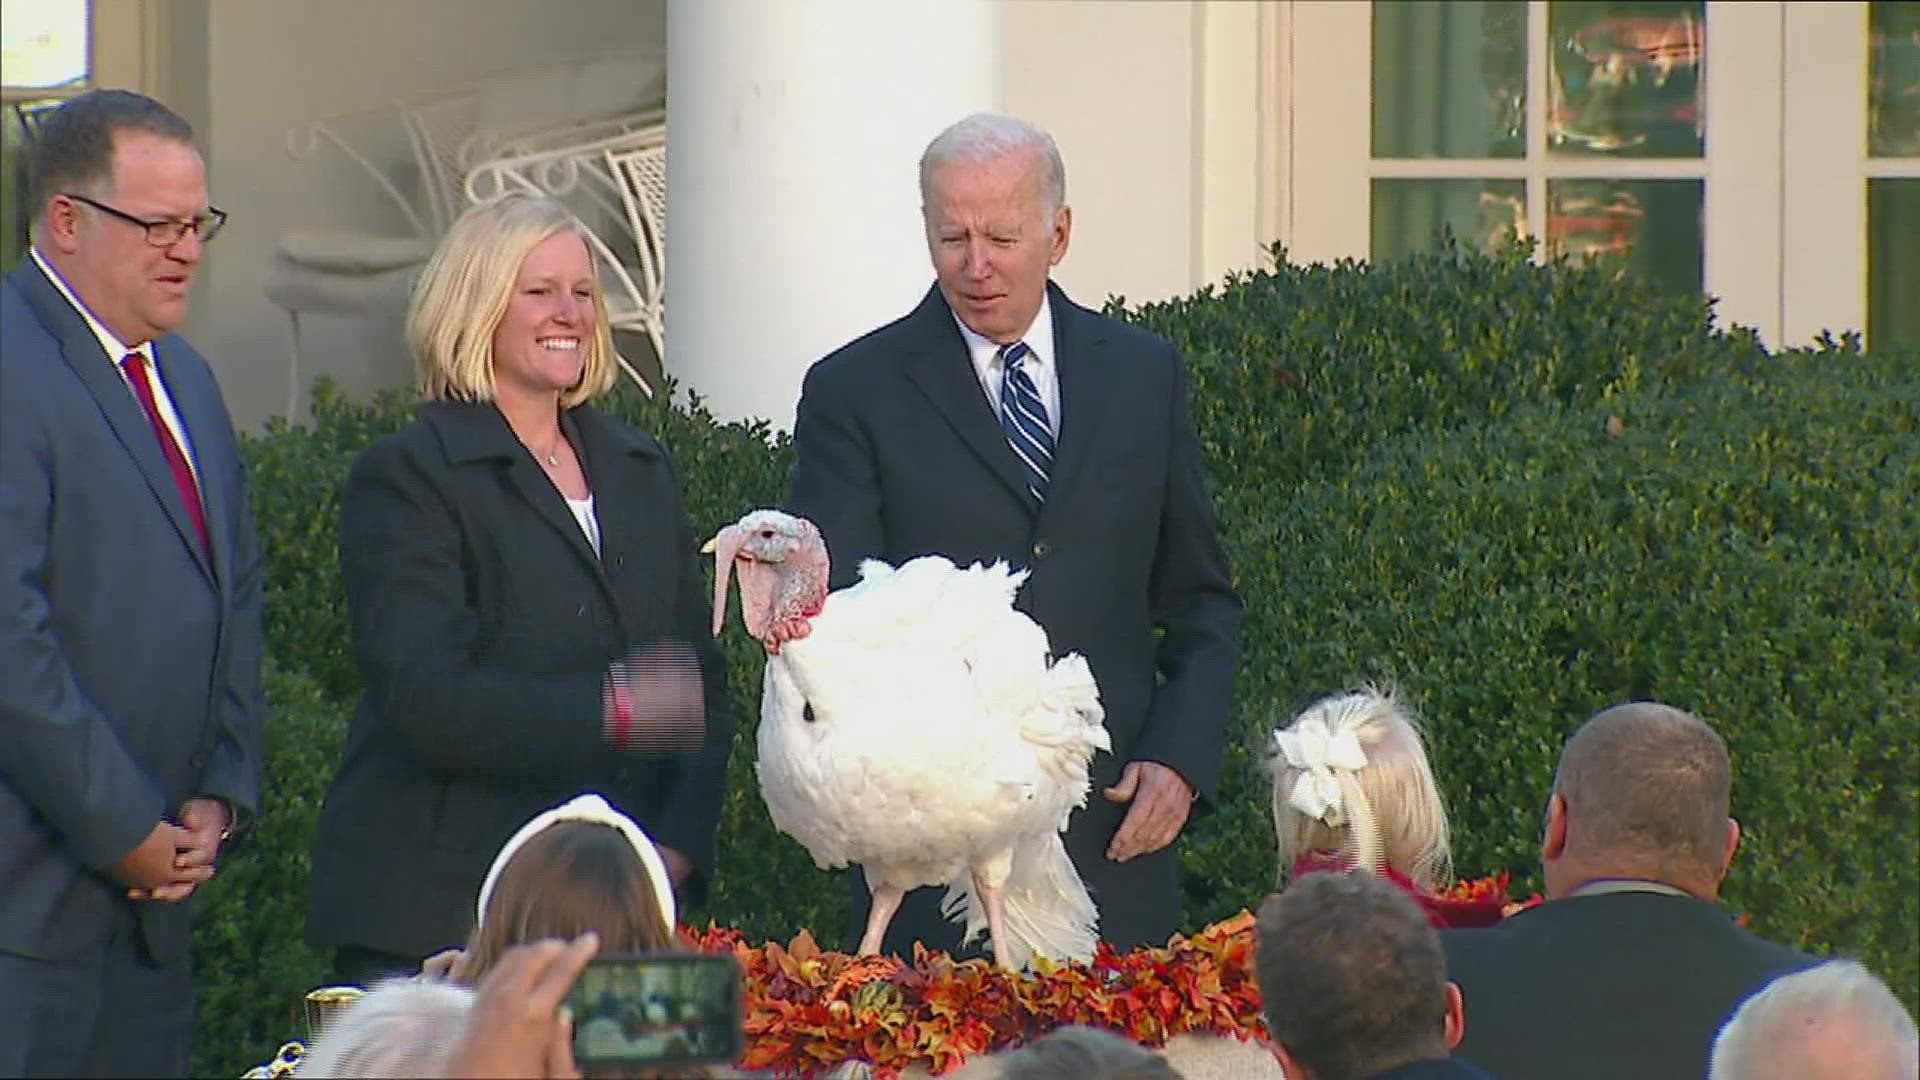 Historians say this all started in 1863 when a live turkey was brought to the White House for Christmas.